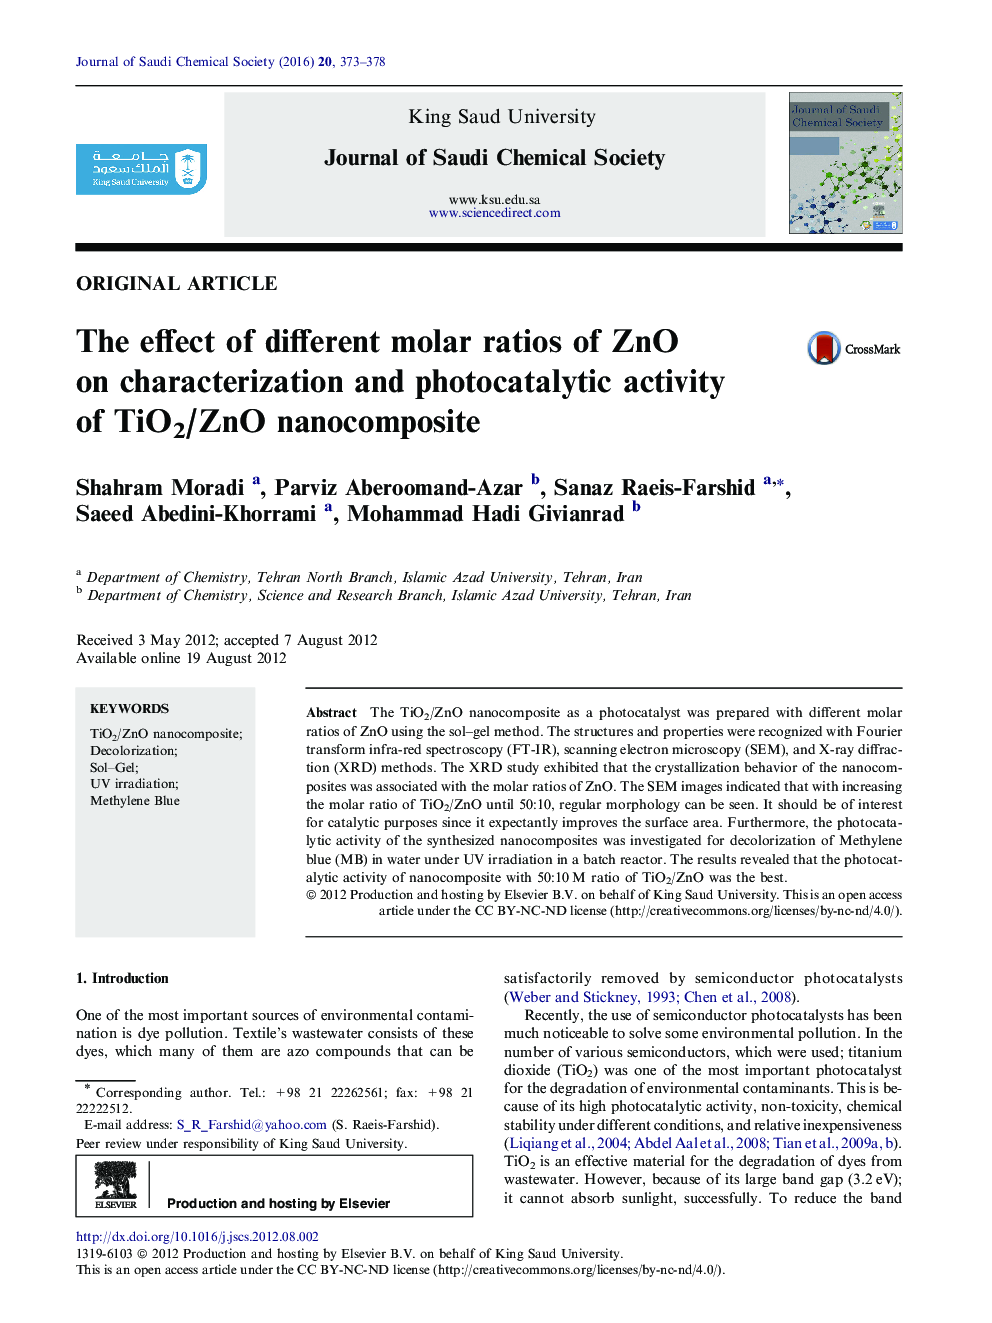 The effect of different molar ratios of ZnO on characterization and photocatalytic activity of TiO2/ZnO nanocomposite 